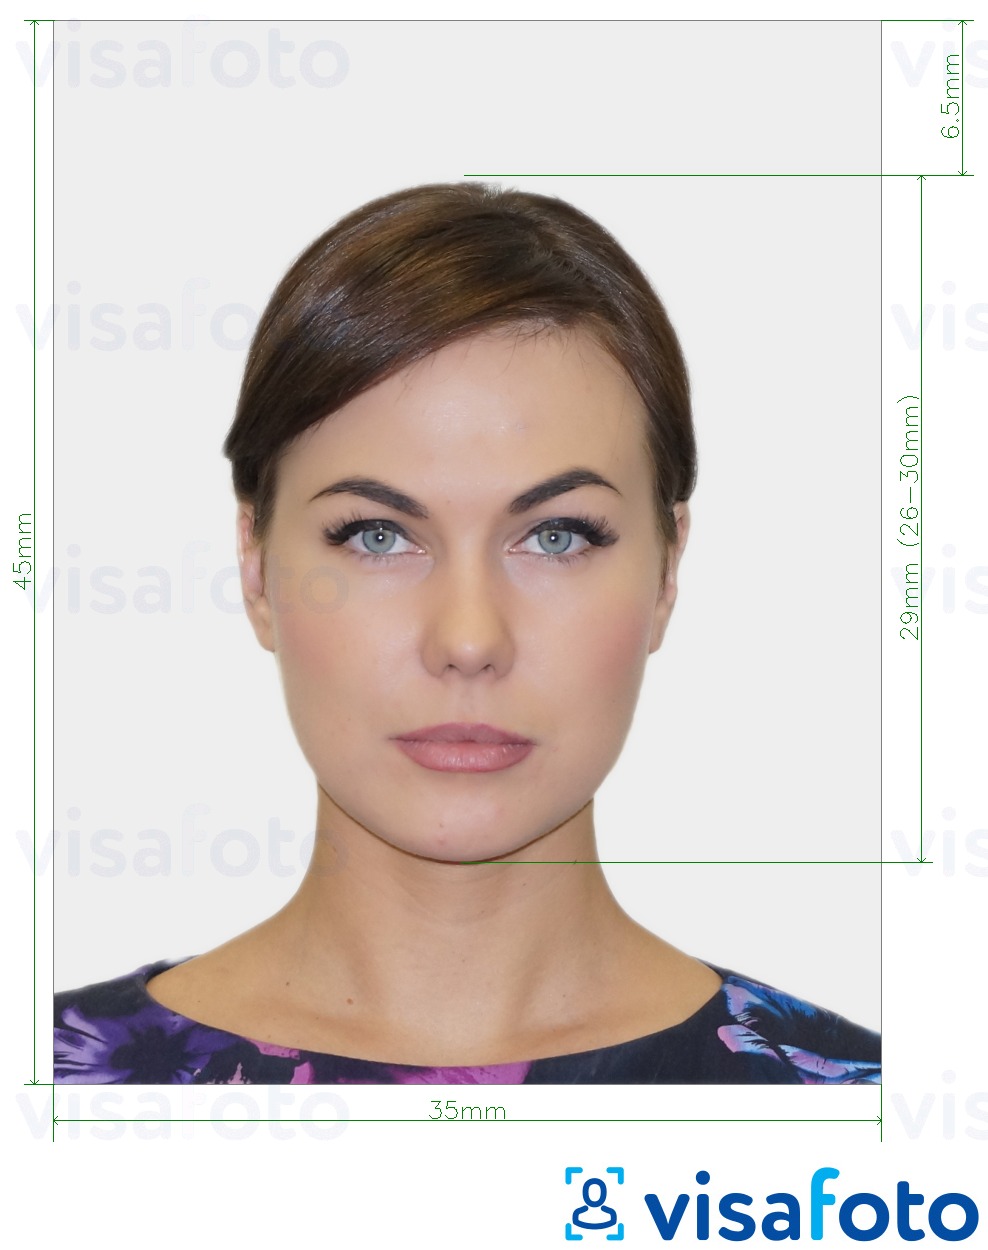 Example of photo for Netherlands Passport 35x45 mm (3.5x4.5 cm) with exact size specification